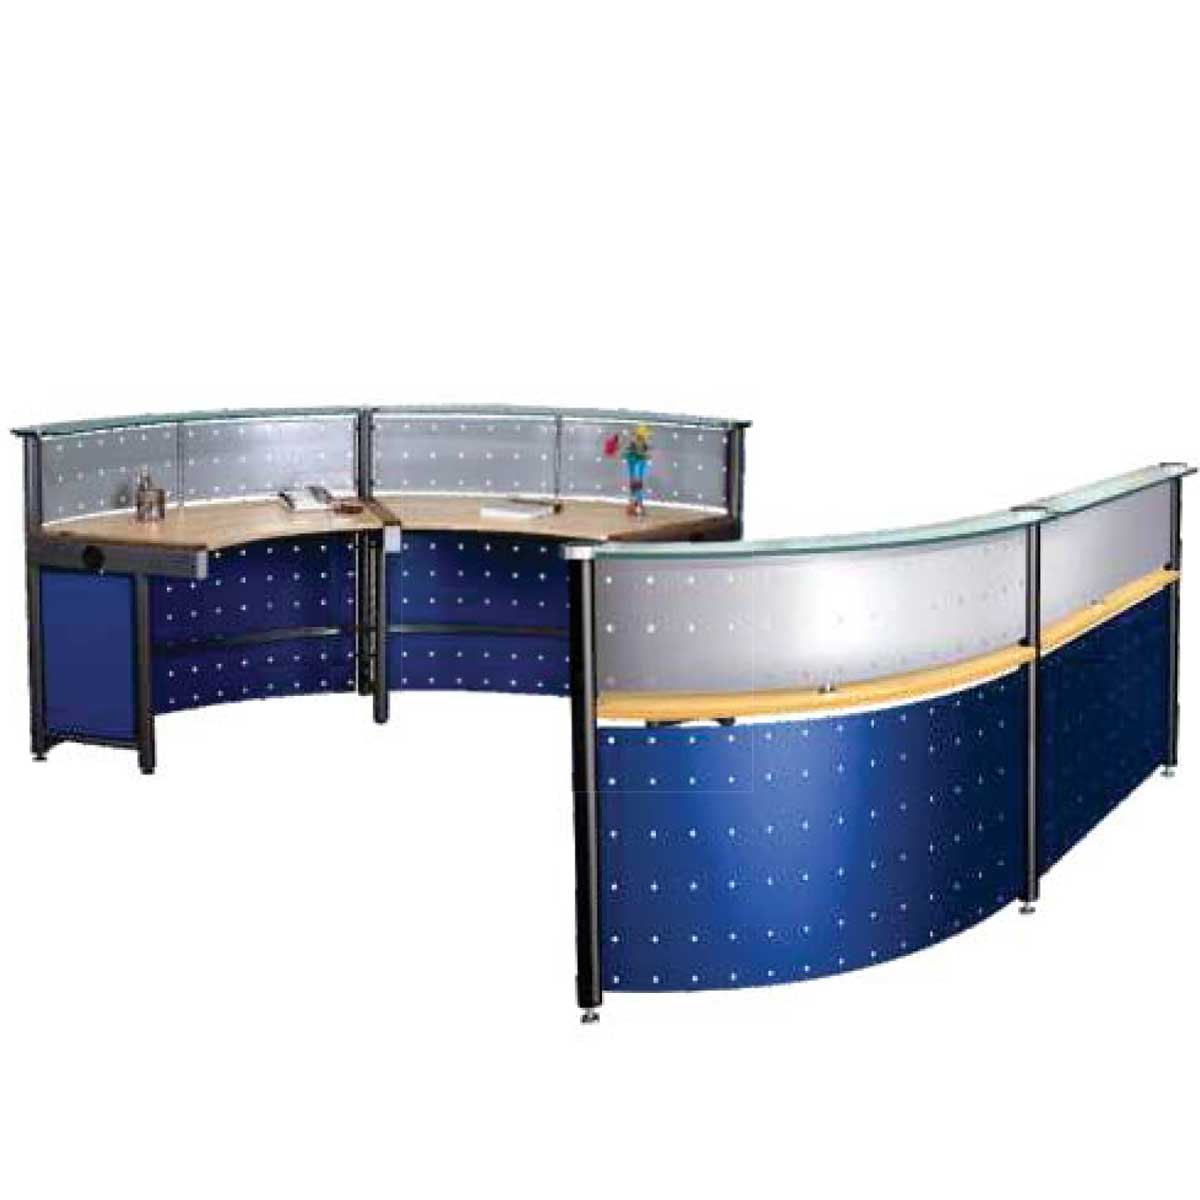 Reception Table Manufacturers, Suppliers in Greater Kailash Ii